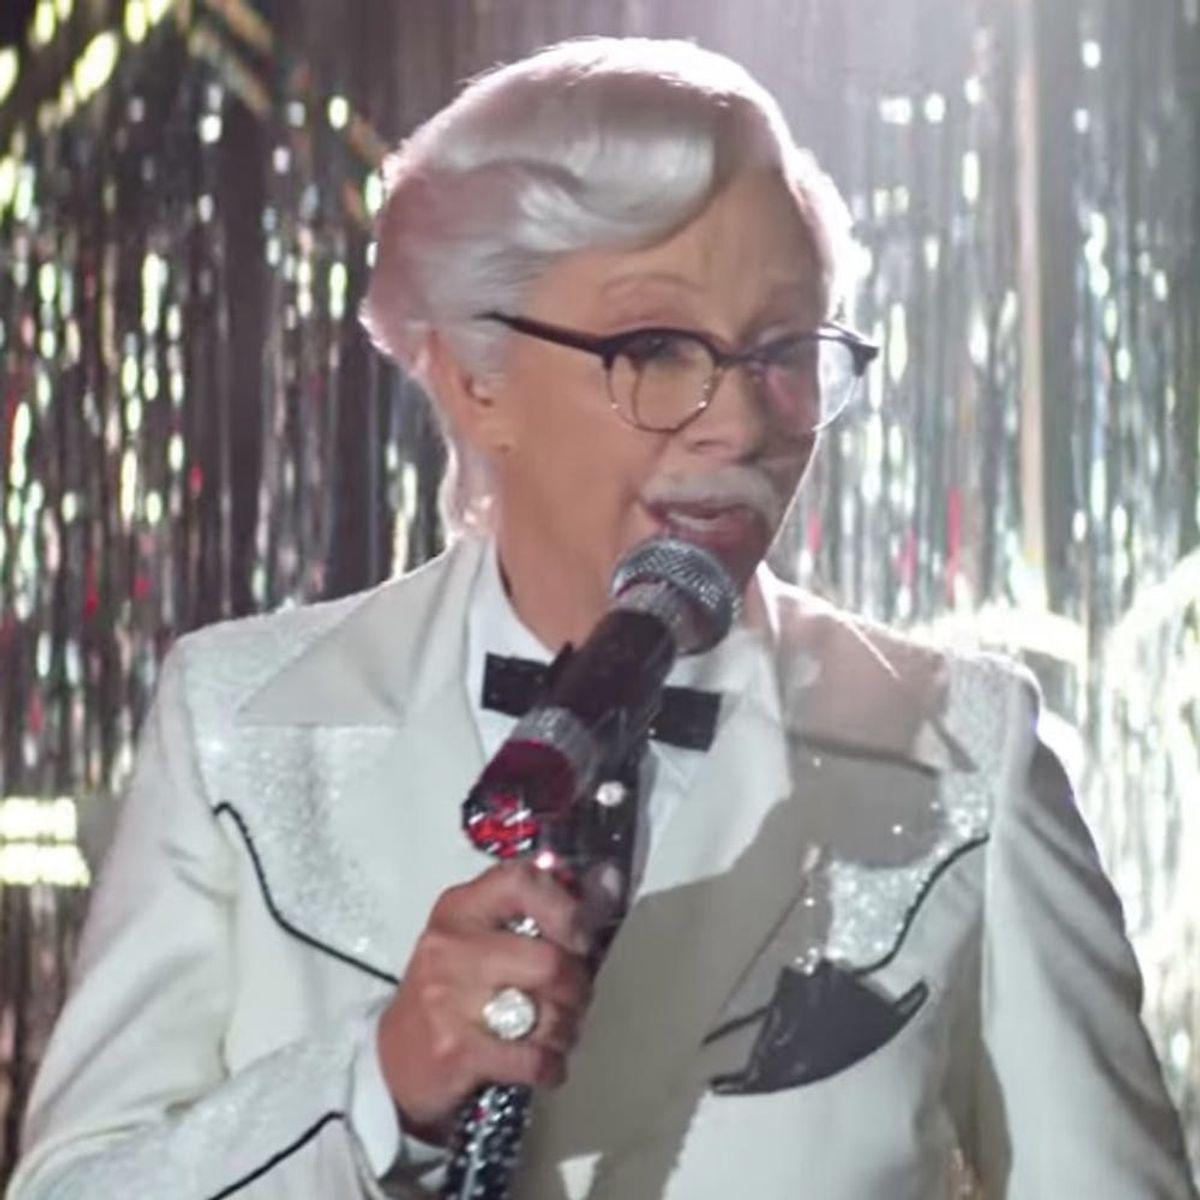 Reba McEntire Is the First Woman to Play KFC’s Colonel Sanders